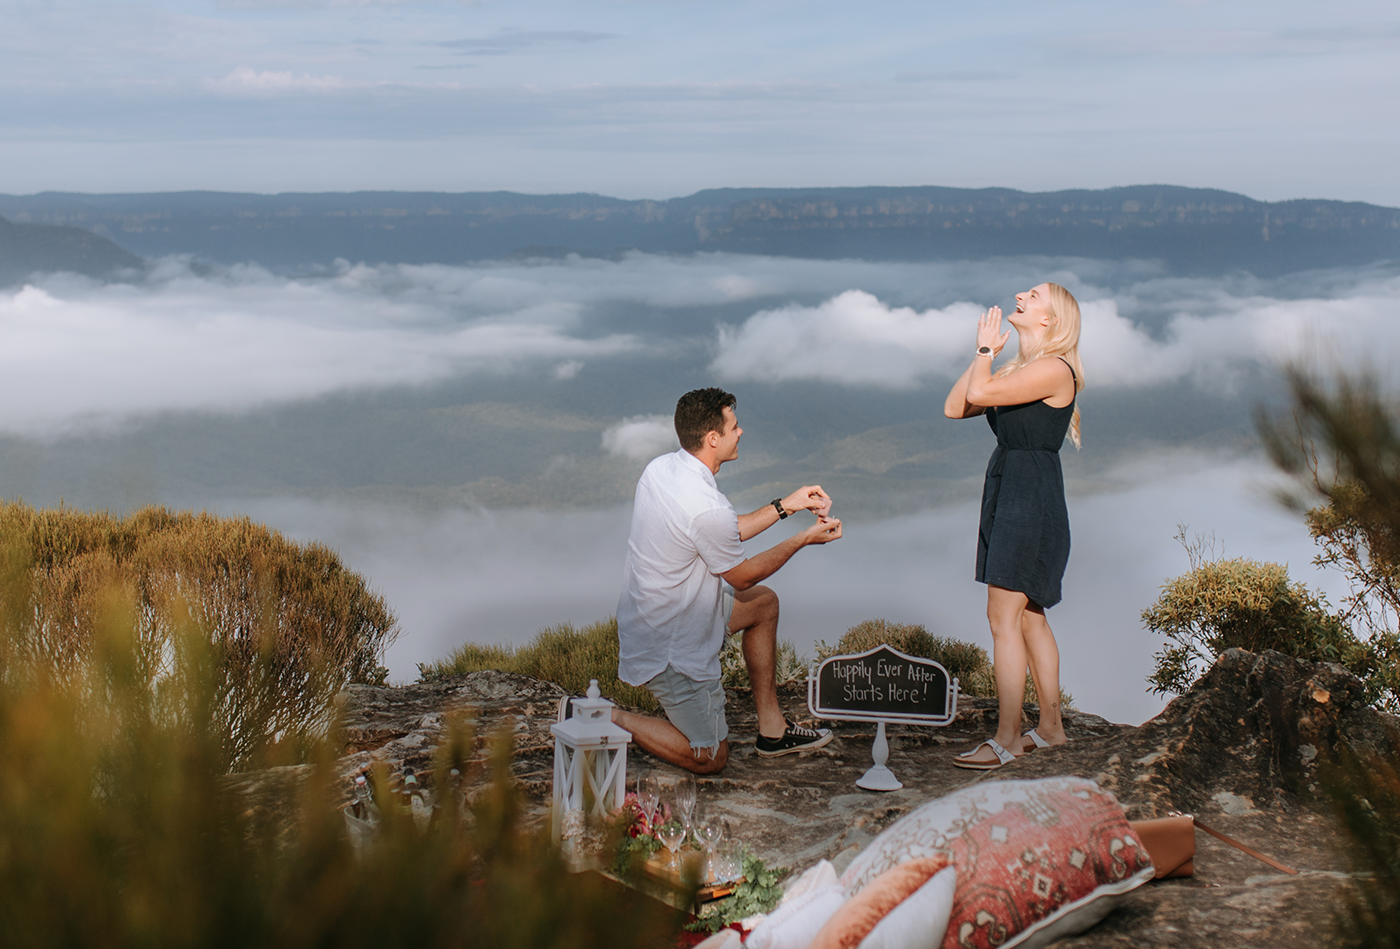 A marriage proposal at a luxury picnic in the Blue Mountains